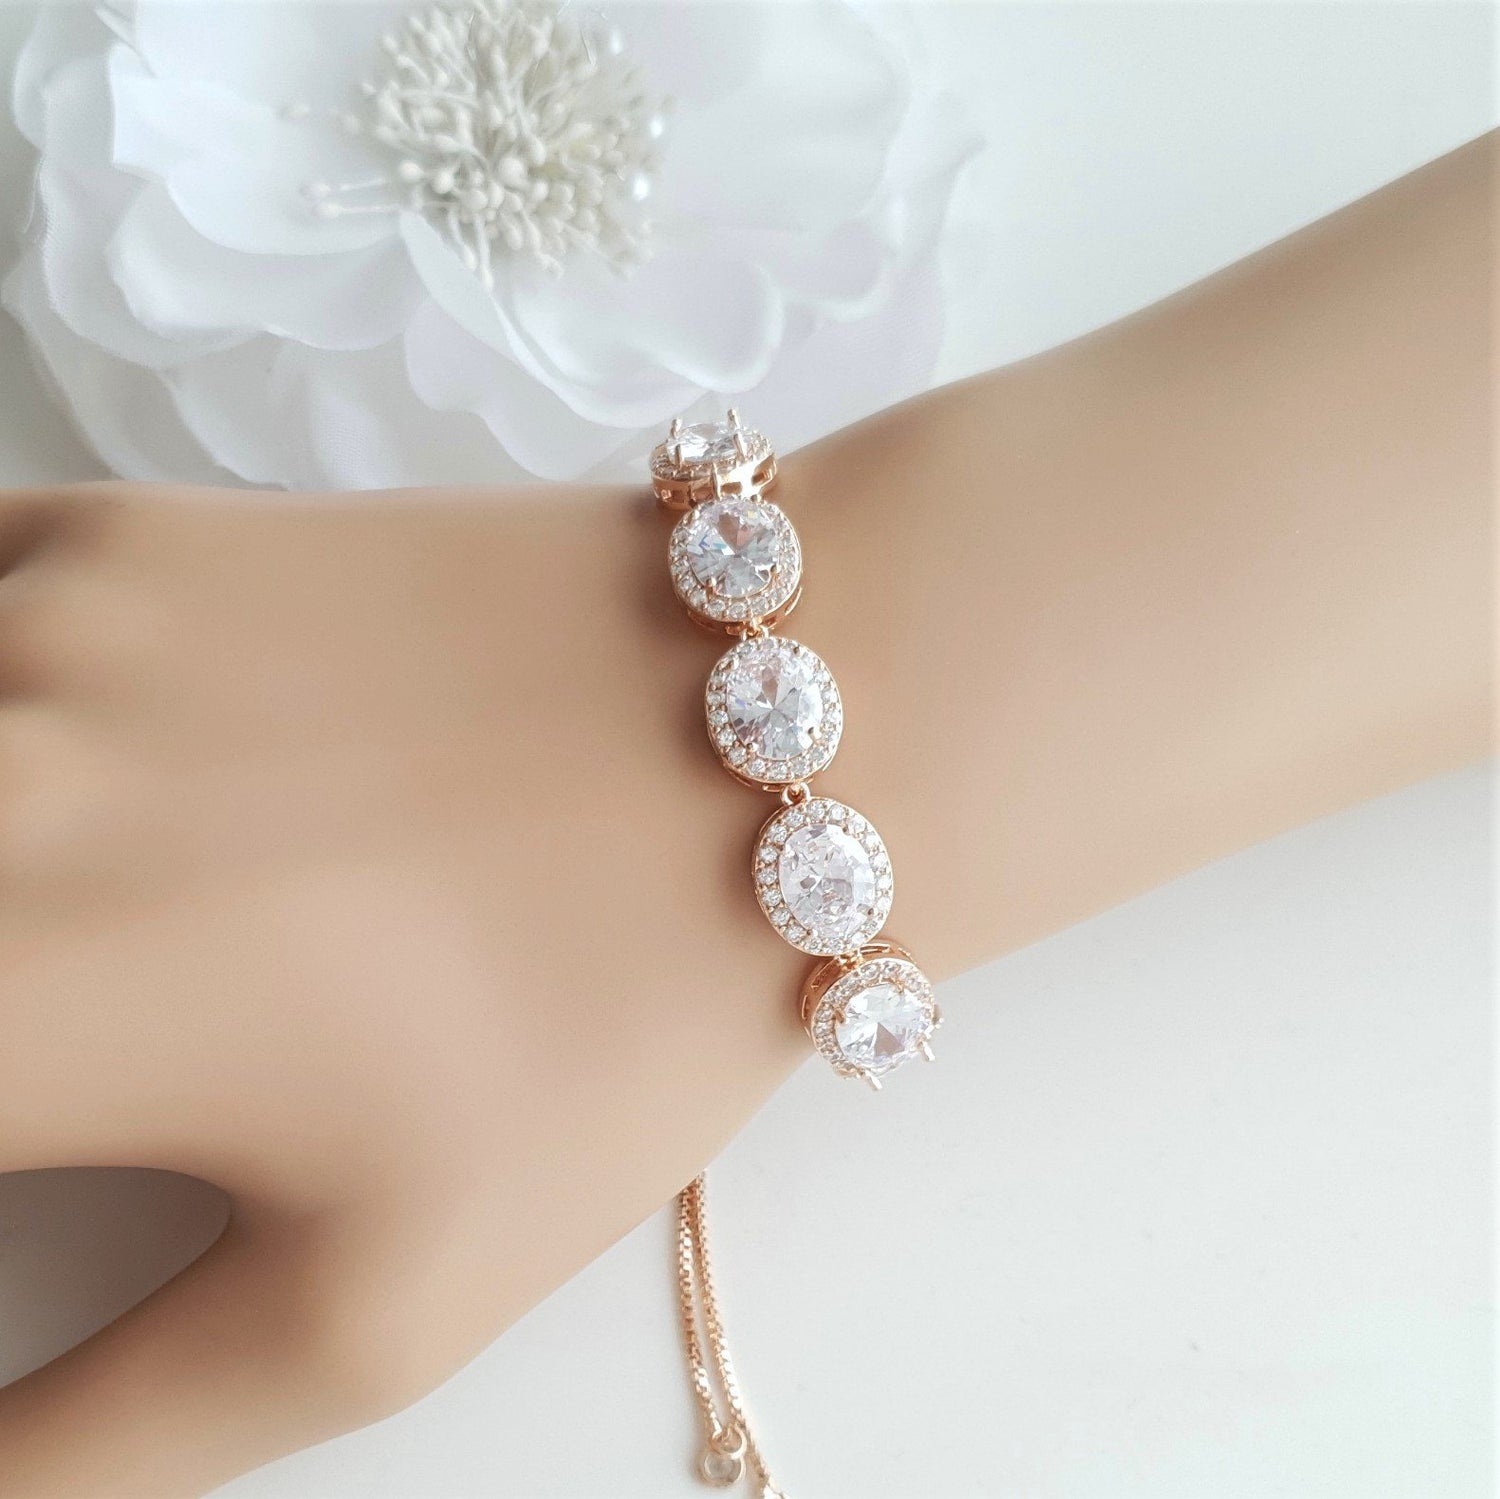 Silver and Crystal Bracelet for Weddings- Emily - PoetryDesigns